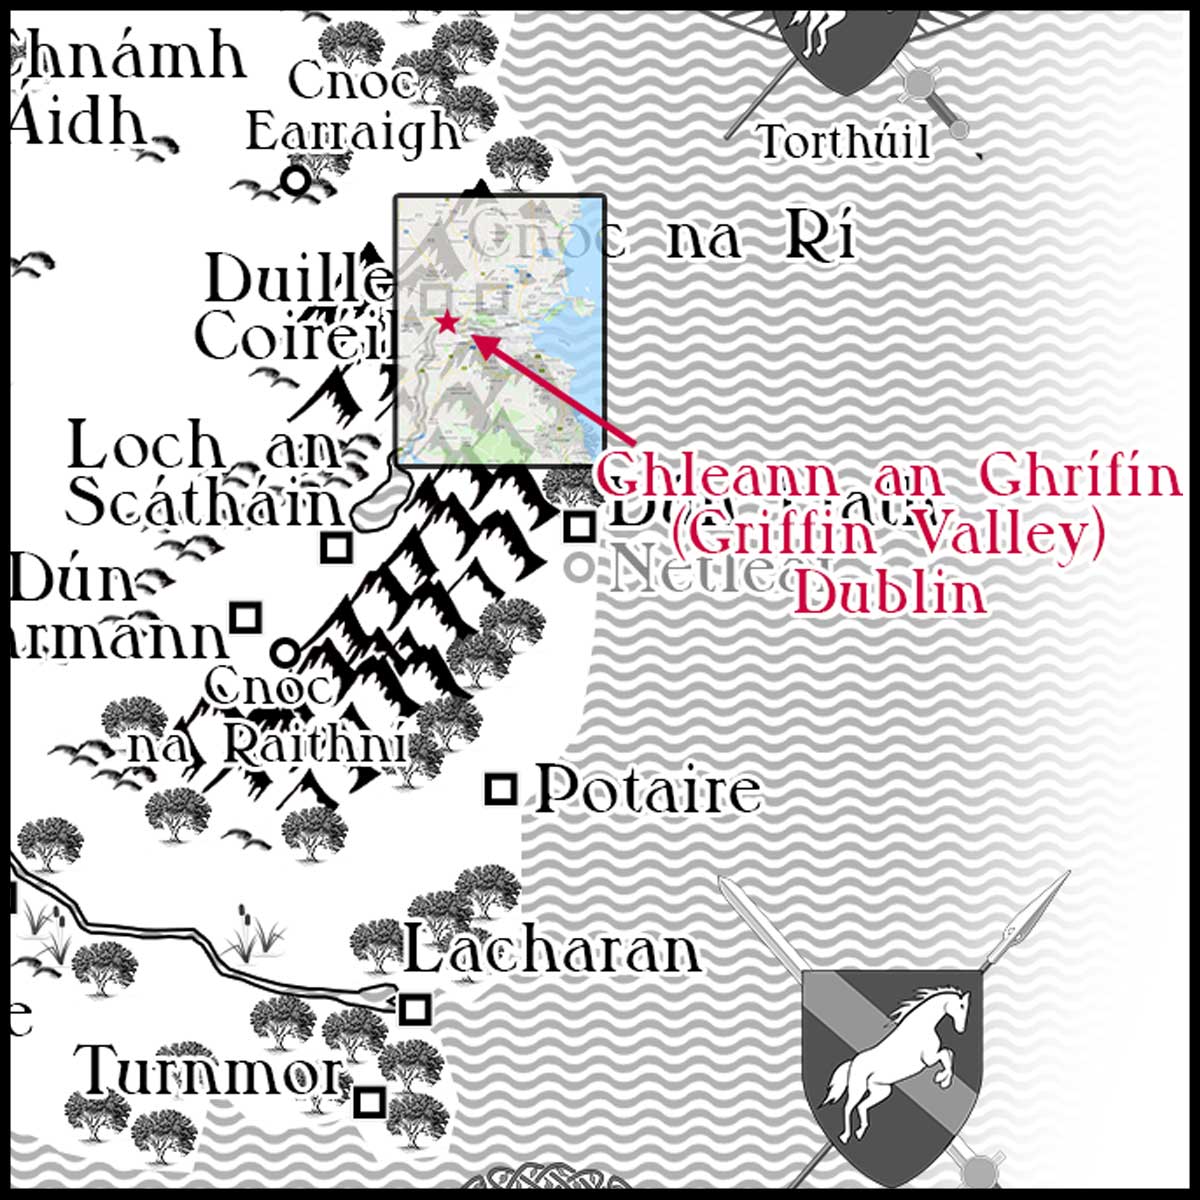 Rathúnas's River Valley and griffin roost serendipitously match the exact location of Ireland's Ghleann an Ghrífín or Griffeen Valley / Griffin Valley